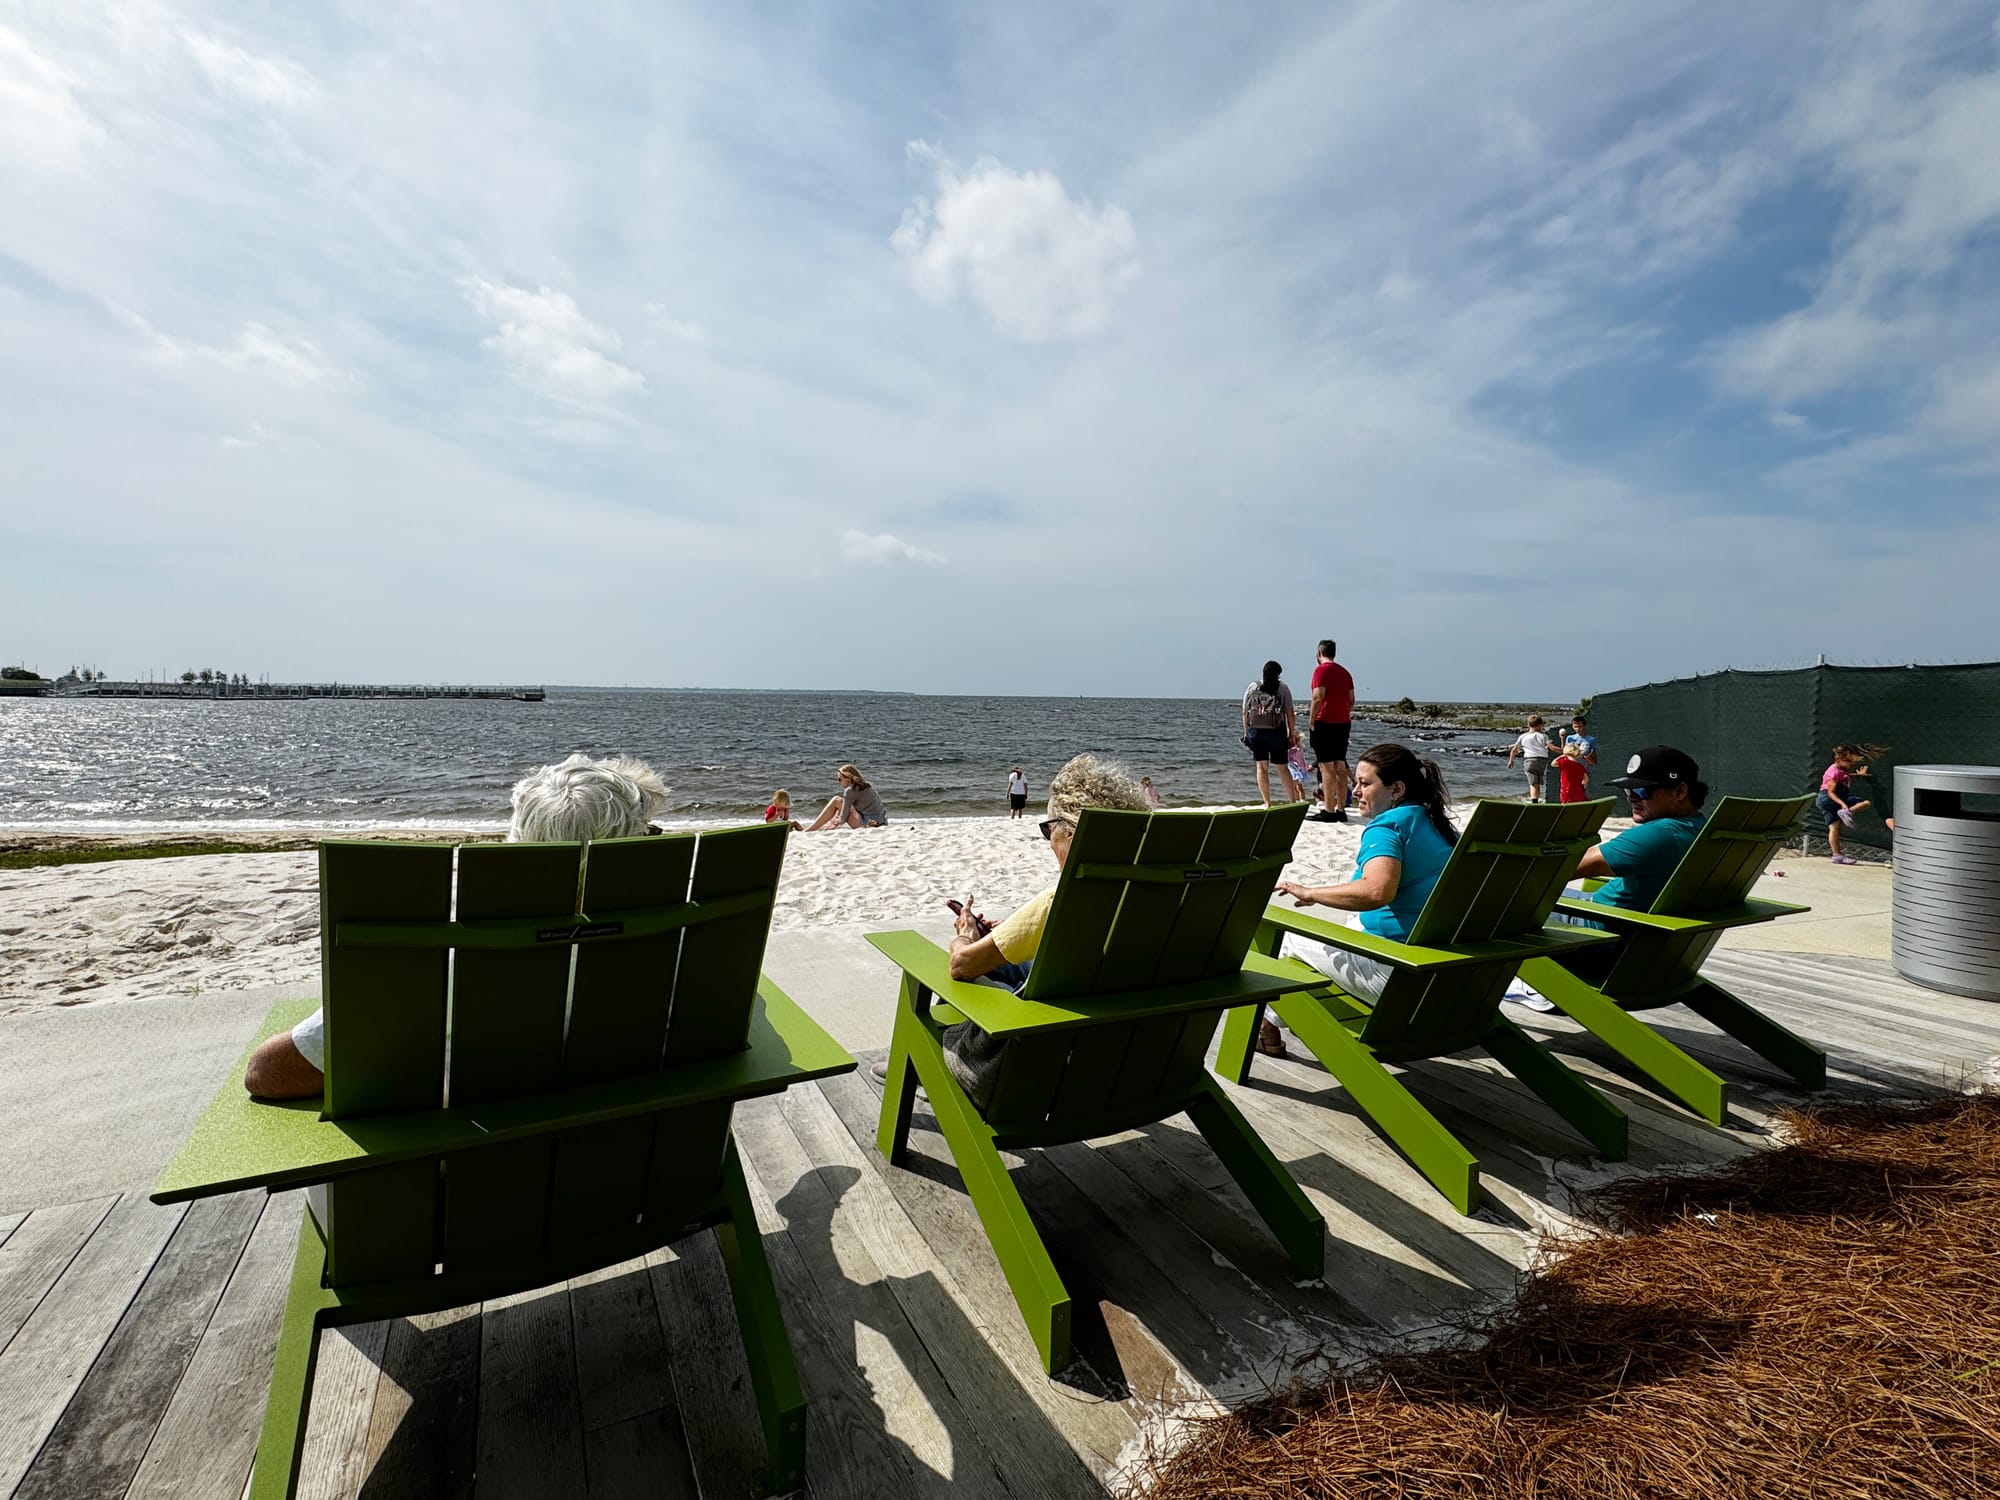 Adirondack chairs along the Bruce Beach waterfront on Pensacola Bay.